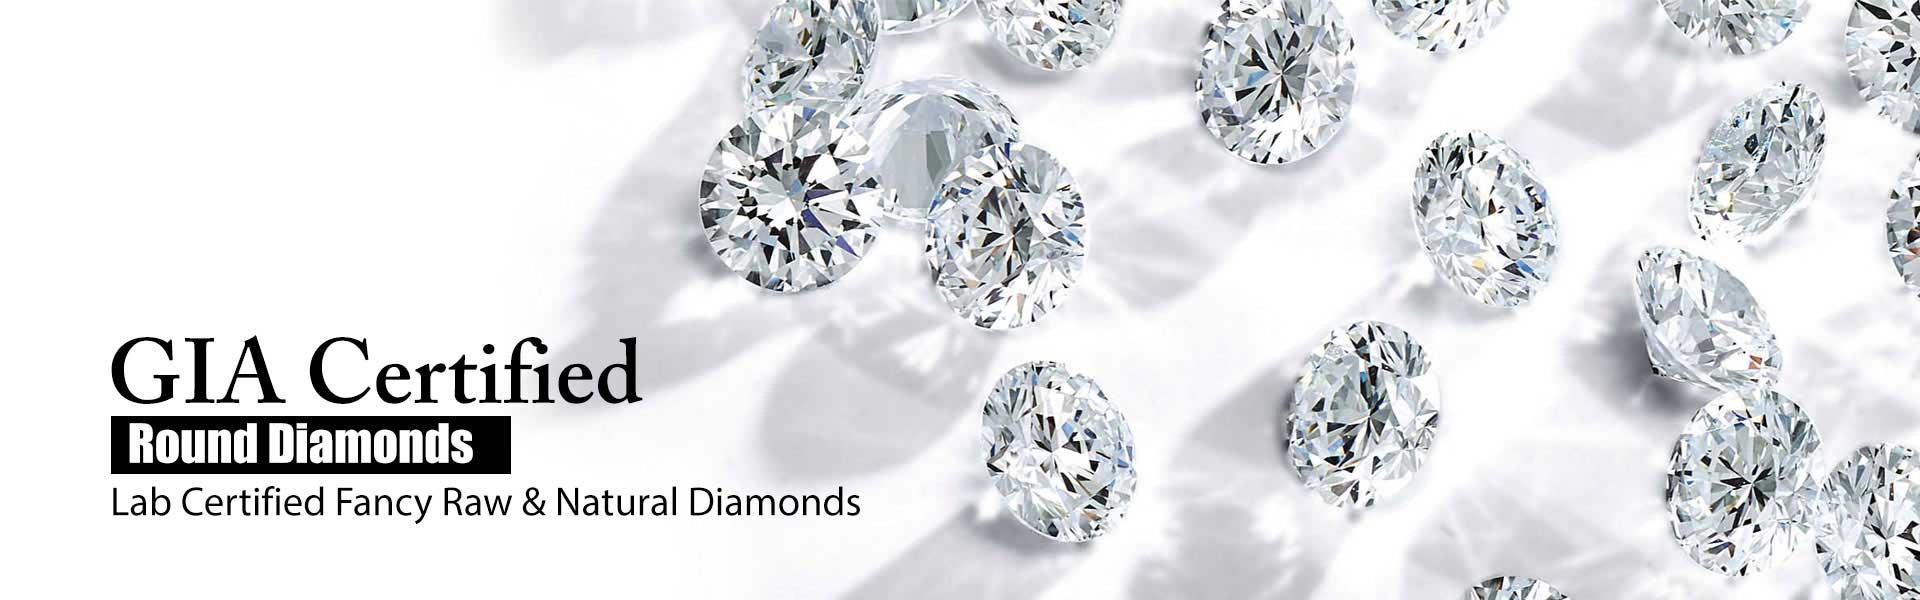  Certified Diamond  Manufacturers in Chicago